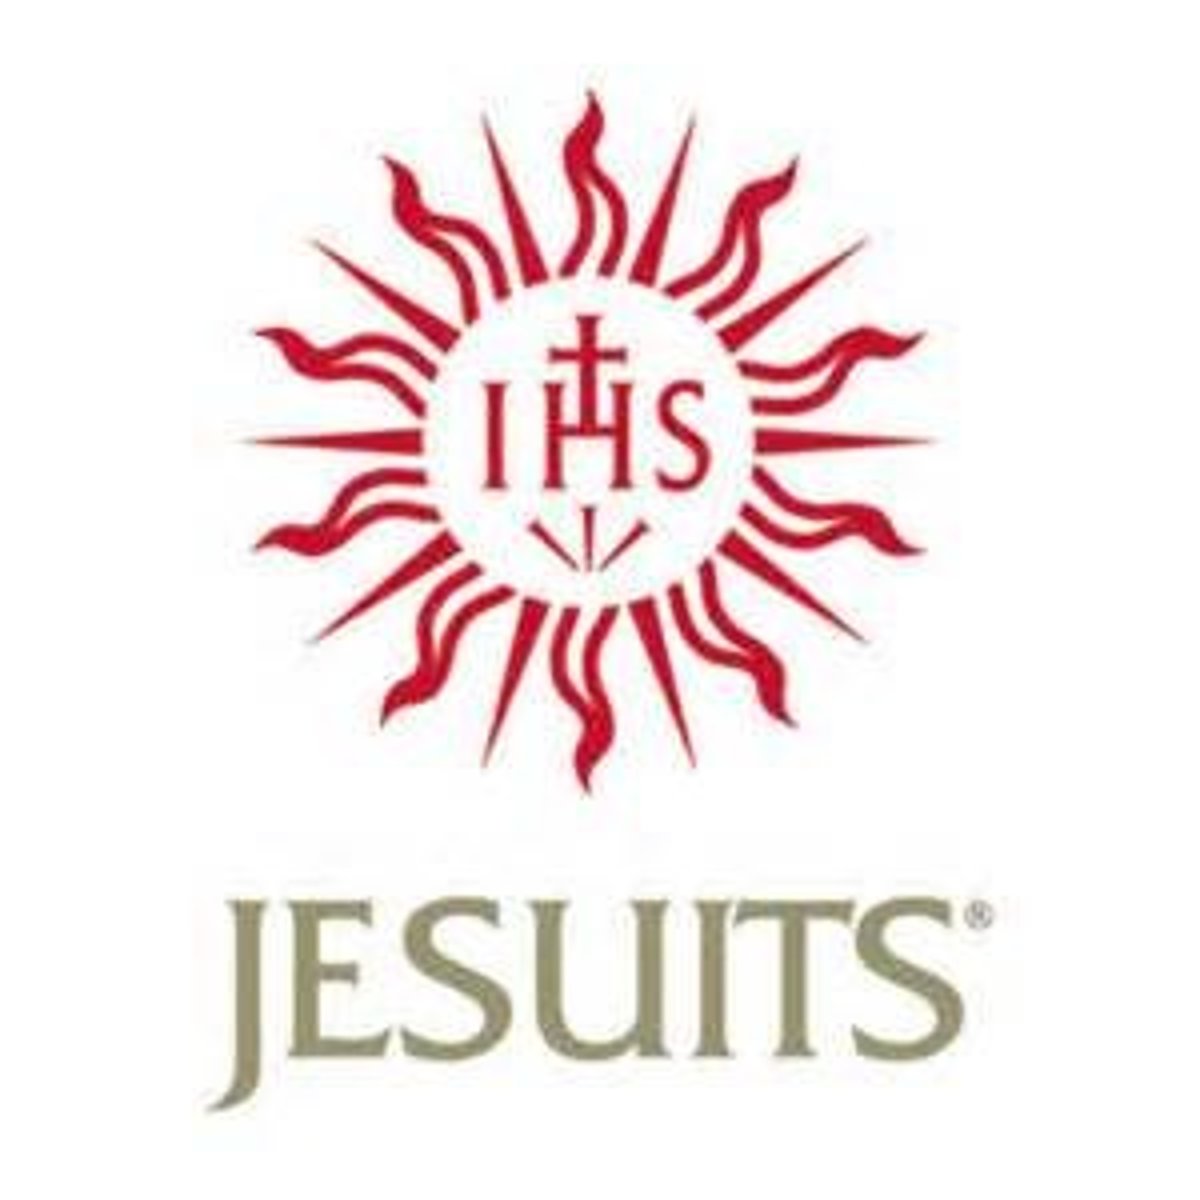 <p>- Jesuits<br>- Founded in 1540 by Ignatius Loyola<br>- Goal: "To Help Souls"<br>- Special Obedience To Pope<br>- Hierarchical<br>- Responsible For Missionary Activity That Brought Large Parts of Europe Back To Catholicism (Also, Brazil, Japan, &amp; Congo)</p>